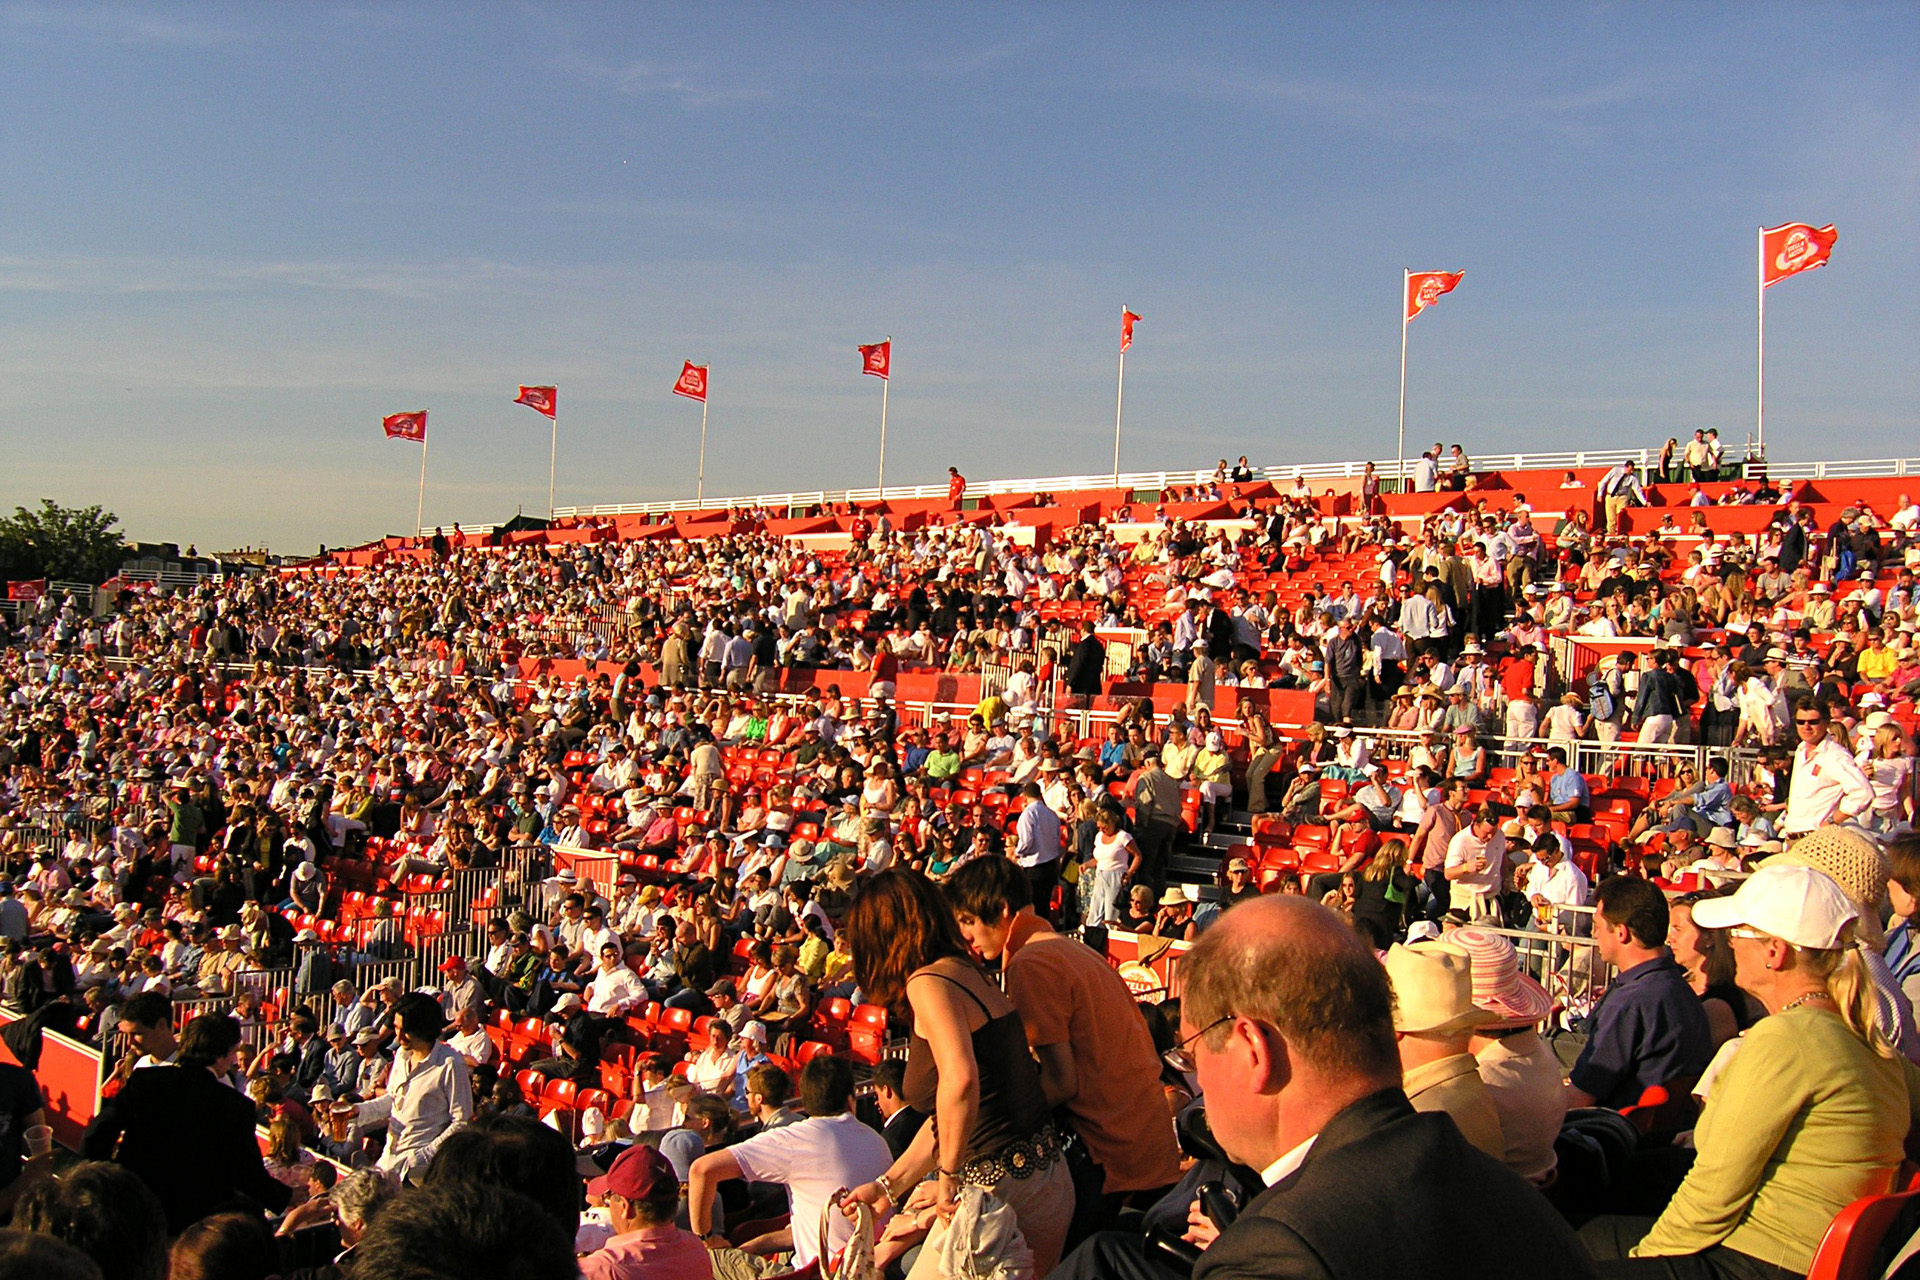 Centre Court stands at Queen's Club during the 2005 Queen's Club Championships